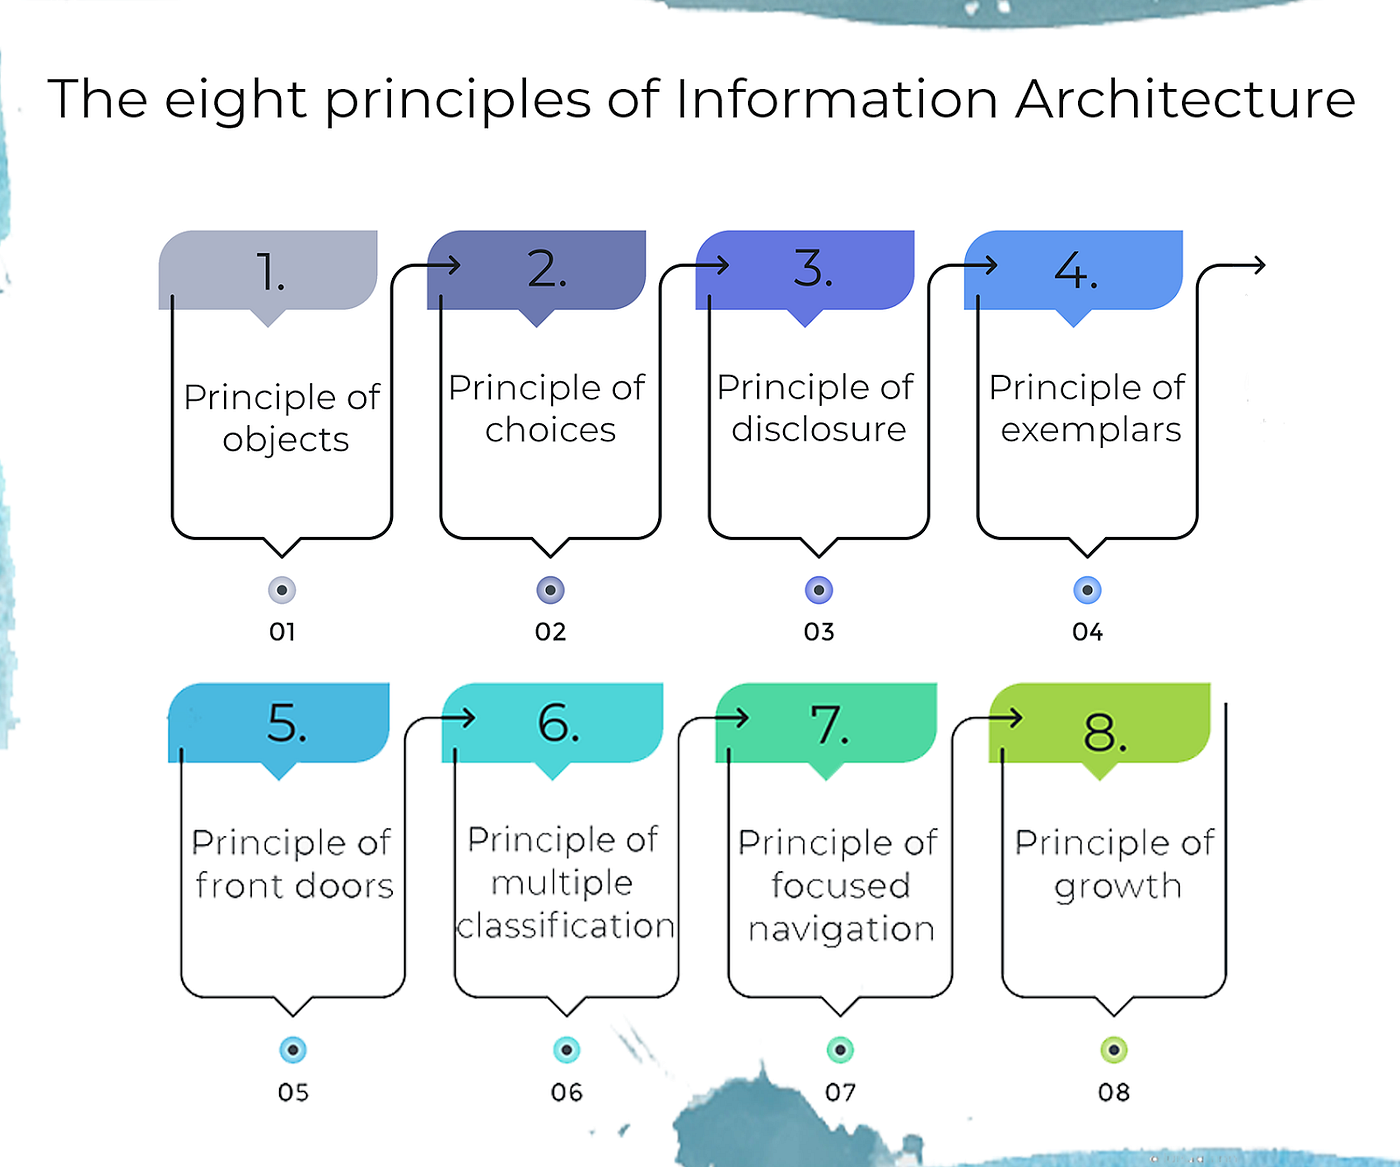 The eight principles of Information Architecture